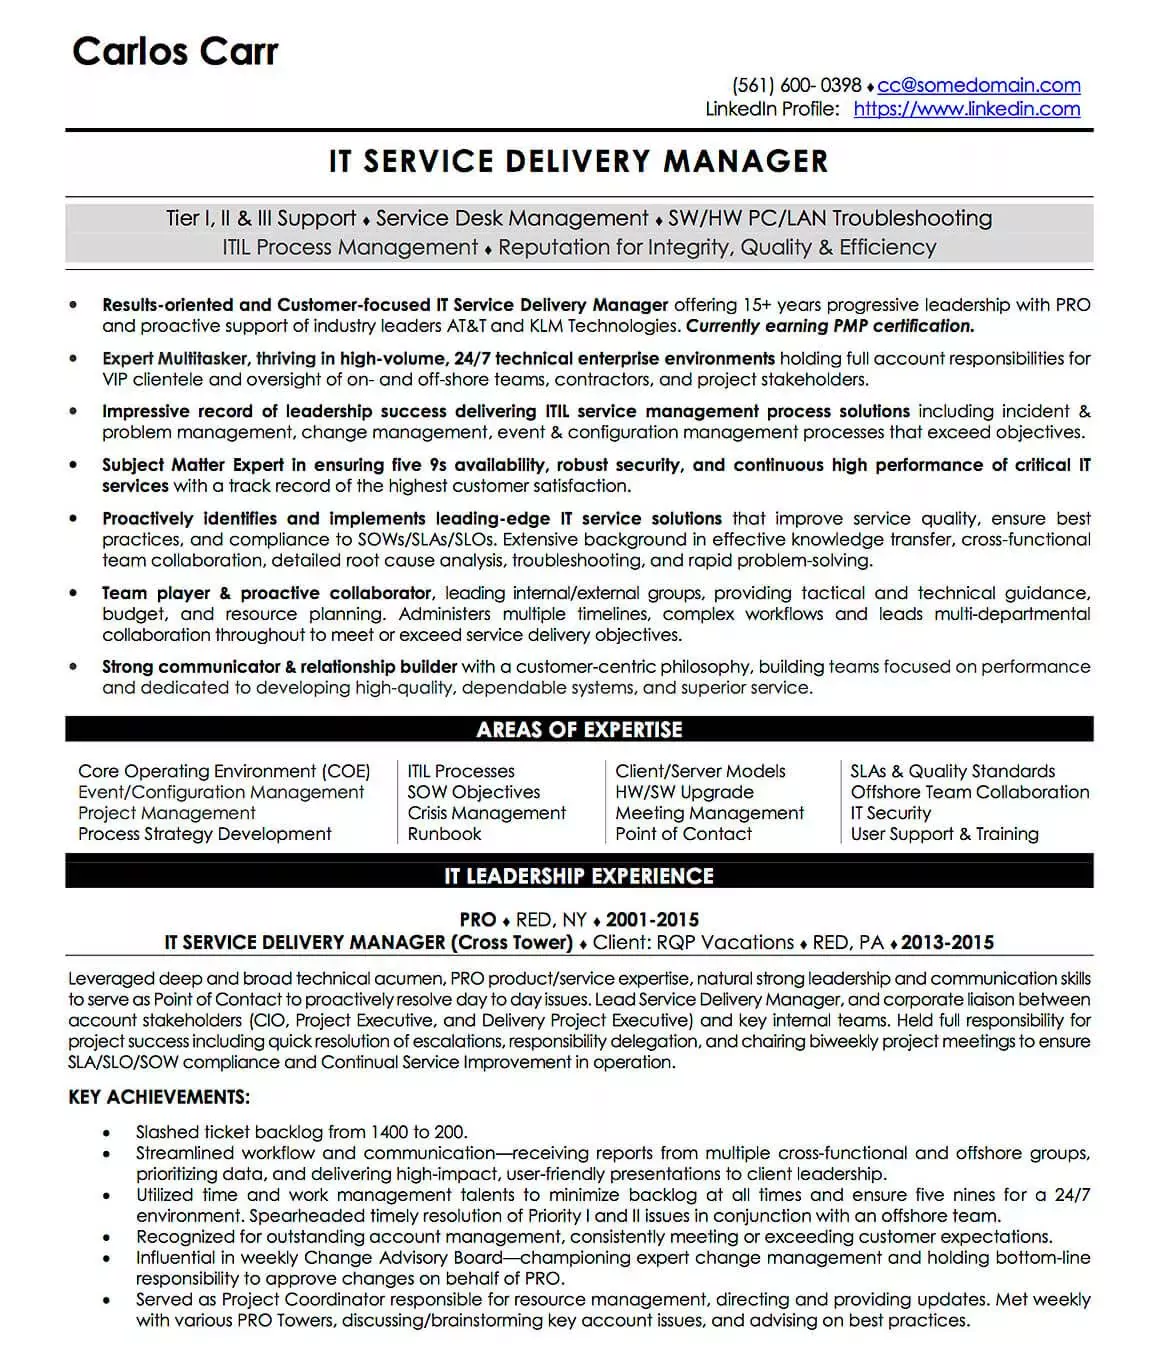 5 IT Service Delivery Manager